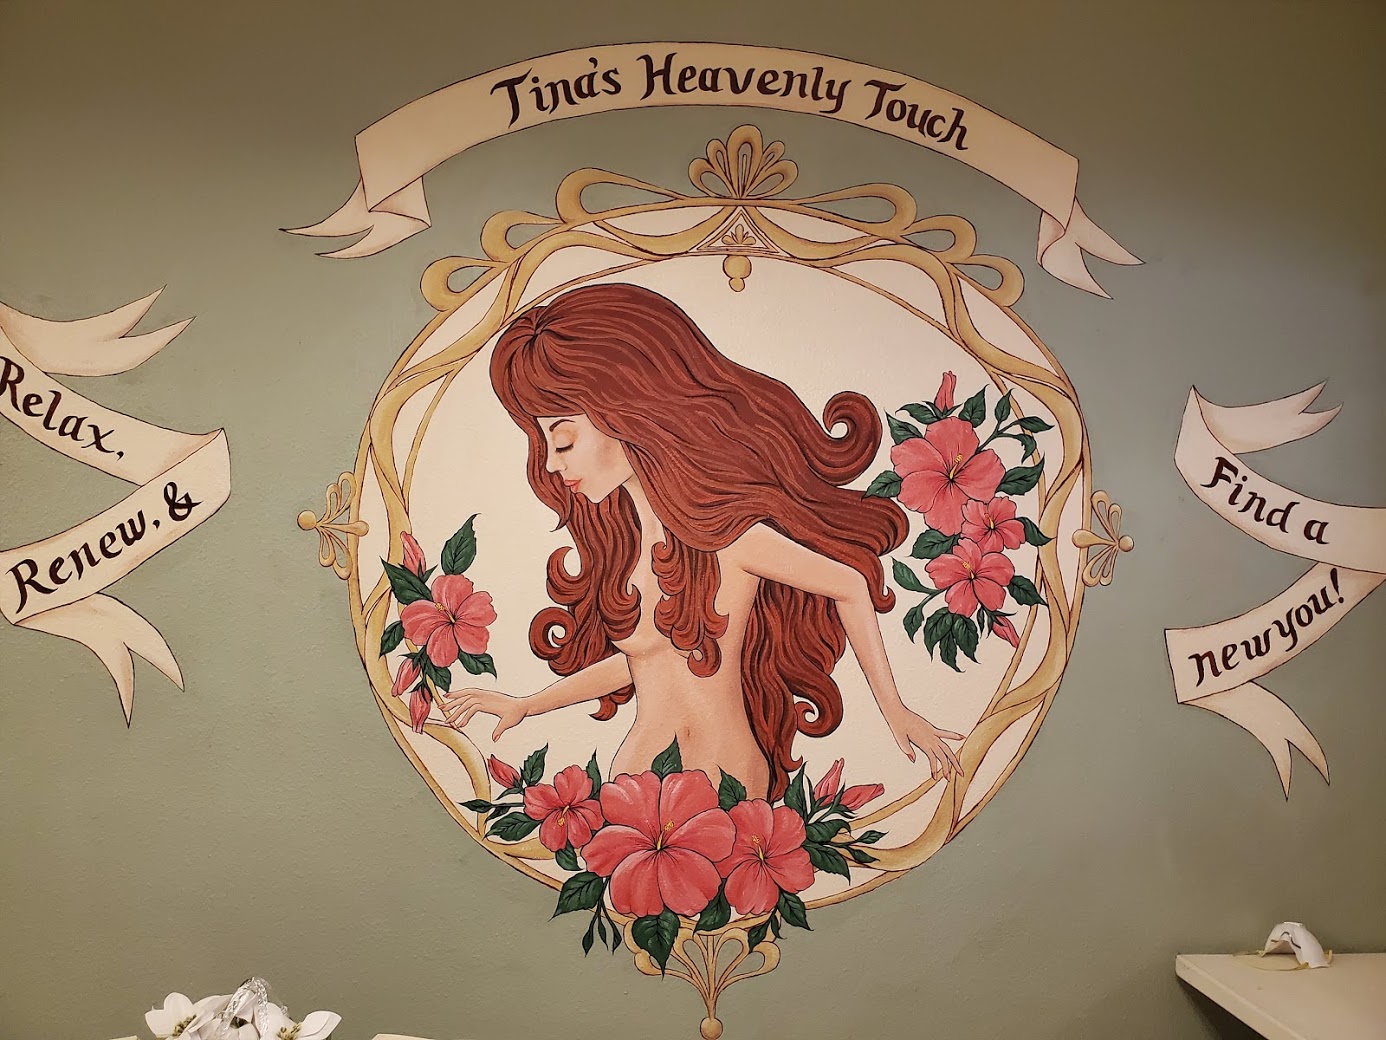 Tinas Heavenly Touch Massage and Day Spa Photo